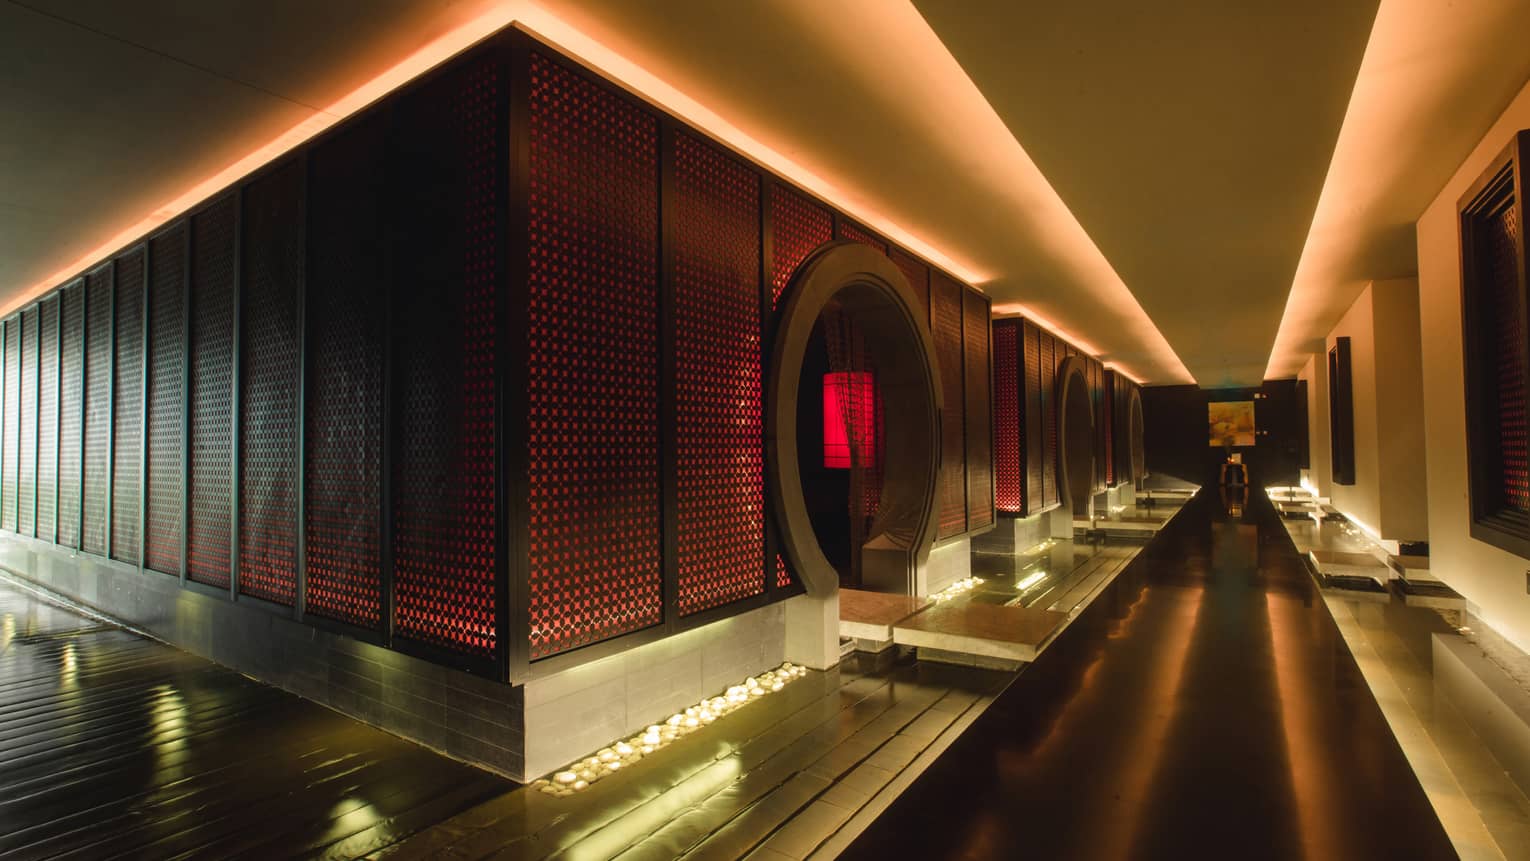 Dark floating walkway down dramatic spa hall past wall with red lights, circular doorways